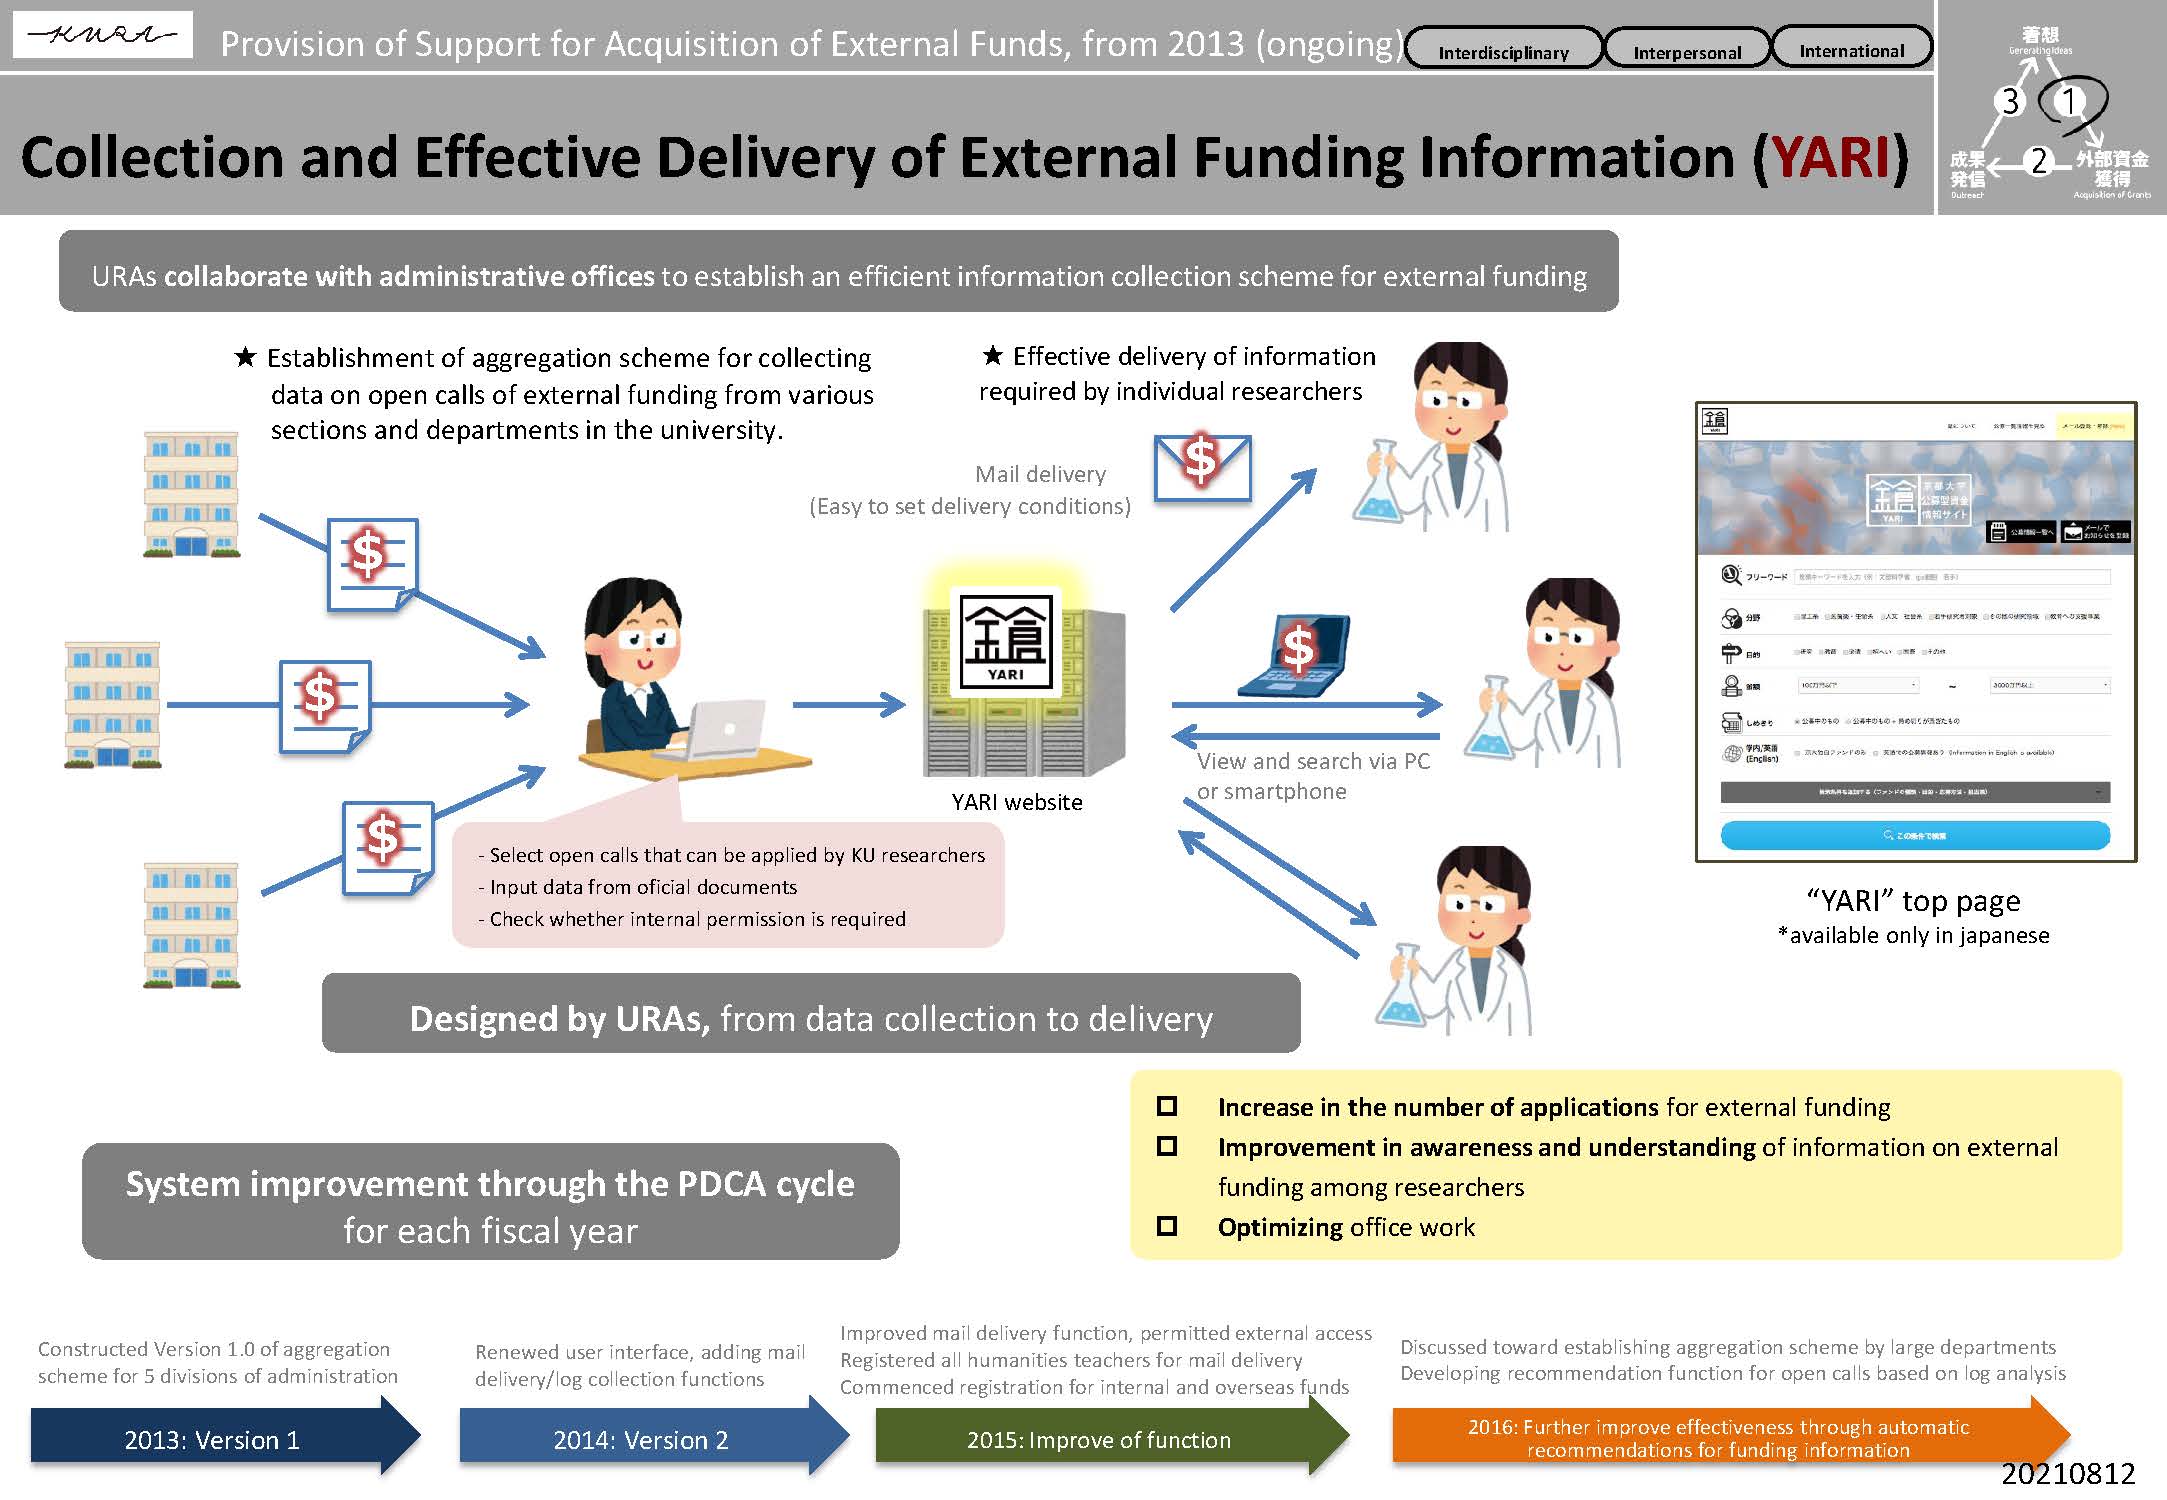 Collection and Effective Delivery of External Funding Information (YARI)